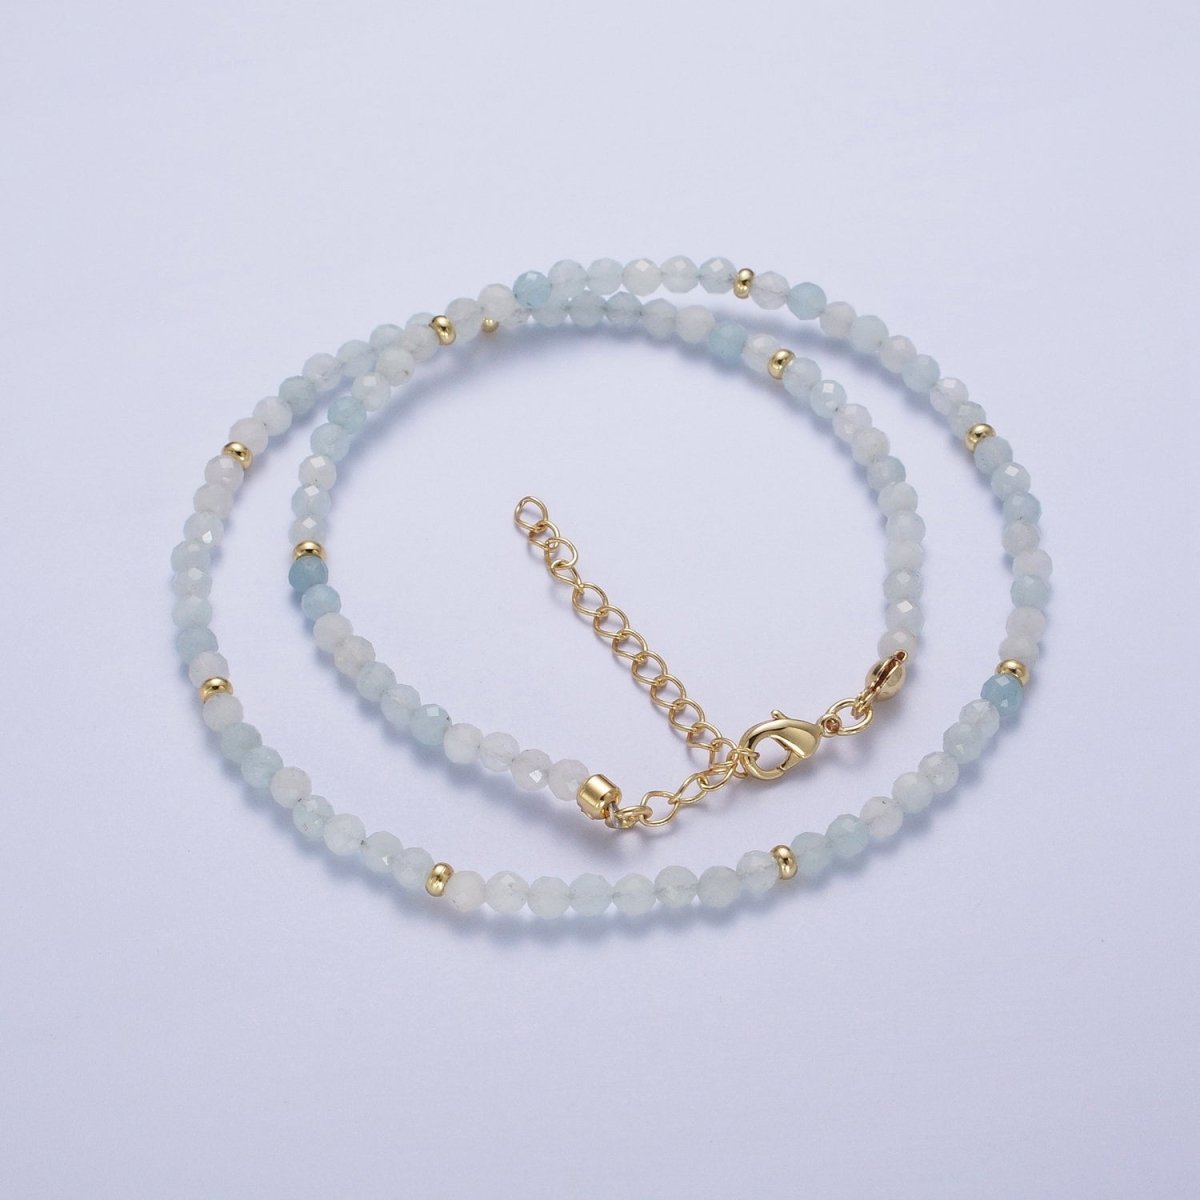 Handmade 15.5 Inch Blue Moonstone / Yellow Citrine Multifaceted Rondelle Beaded Gold Crimp Spacer Choker Necklace | WA-1187 WA-1189 Clearance Pricing - DLUXCA